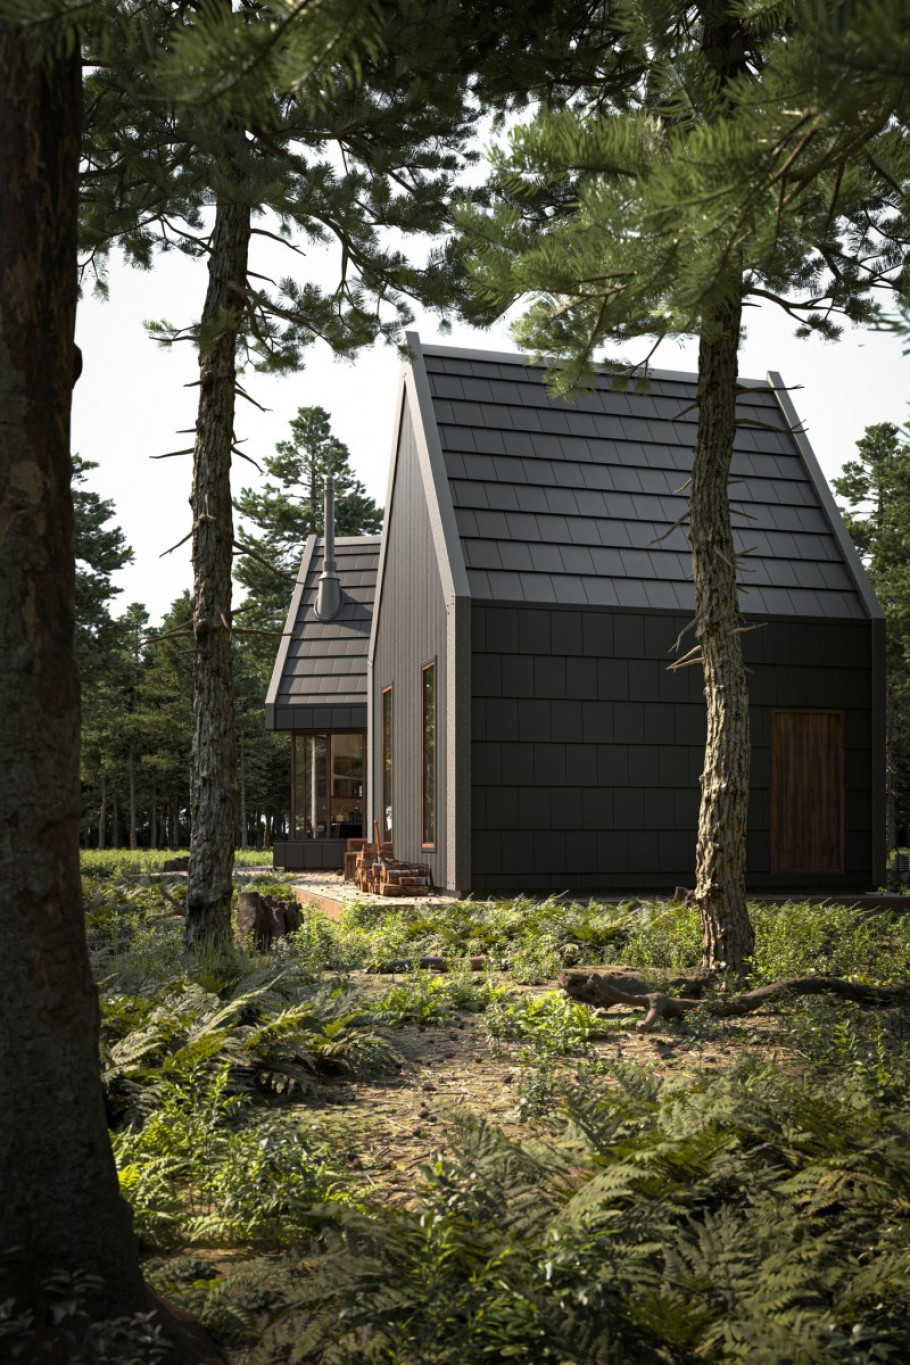 Forest Cabins